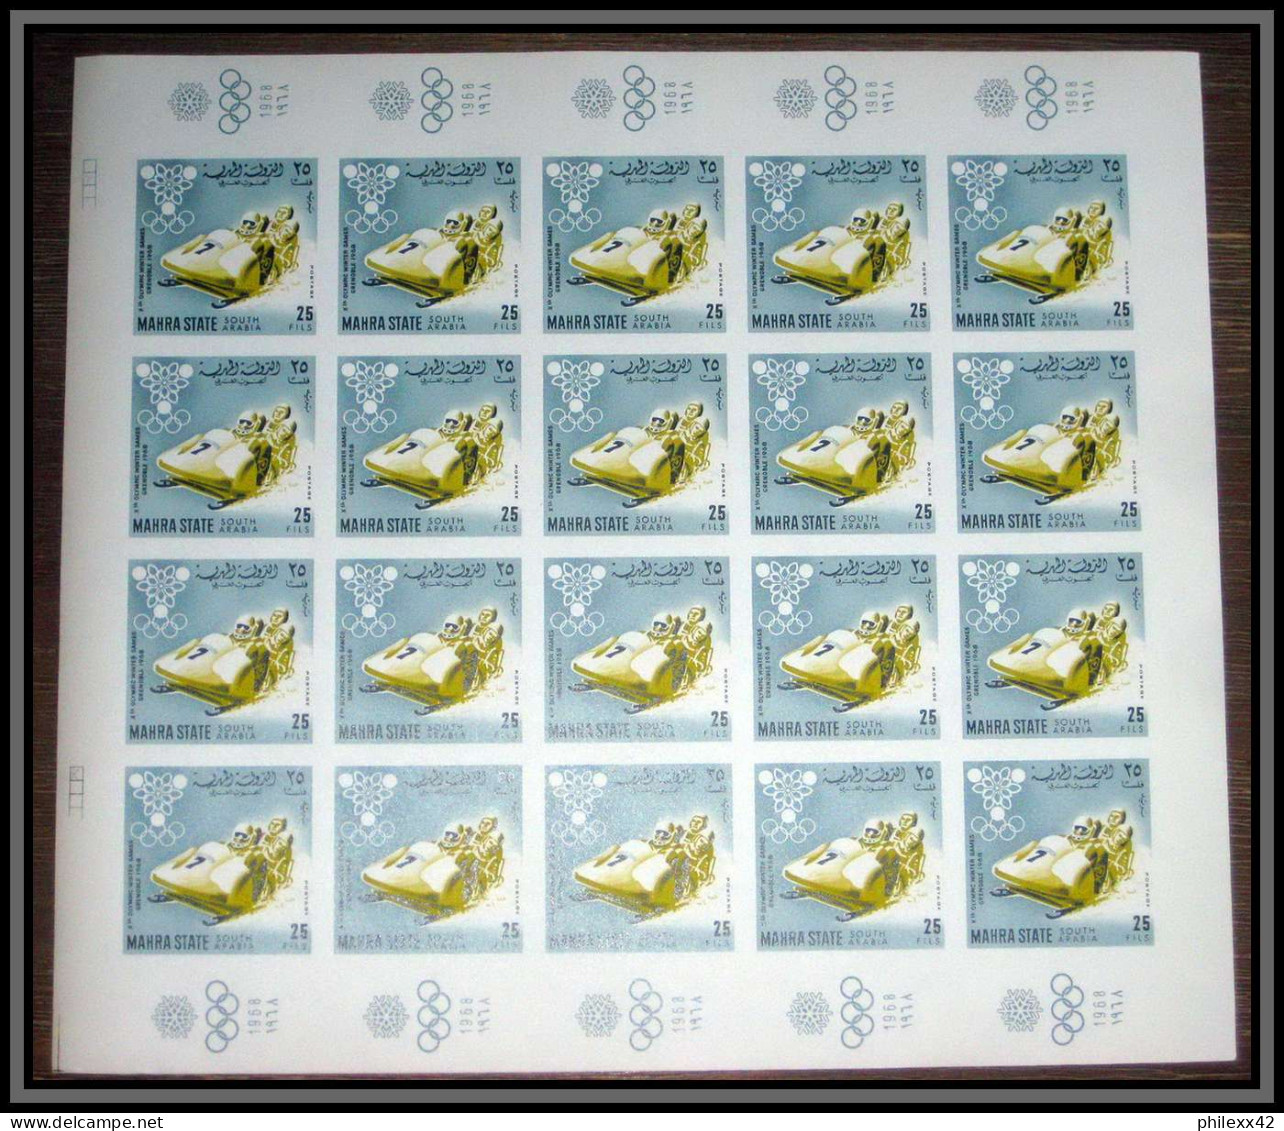 Aden - 1067d Mahra state - N°39/47 B  jeux olympiques olympic games grenoble 1968 non dentelé MNH imperf feuille sheets